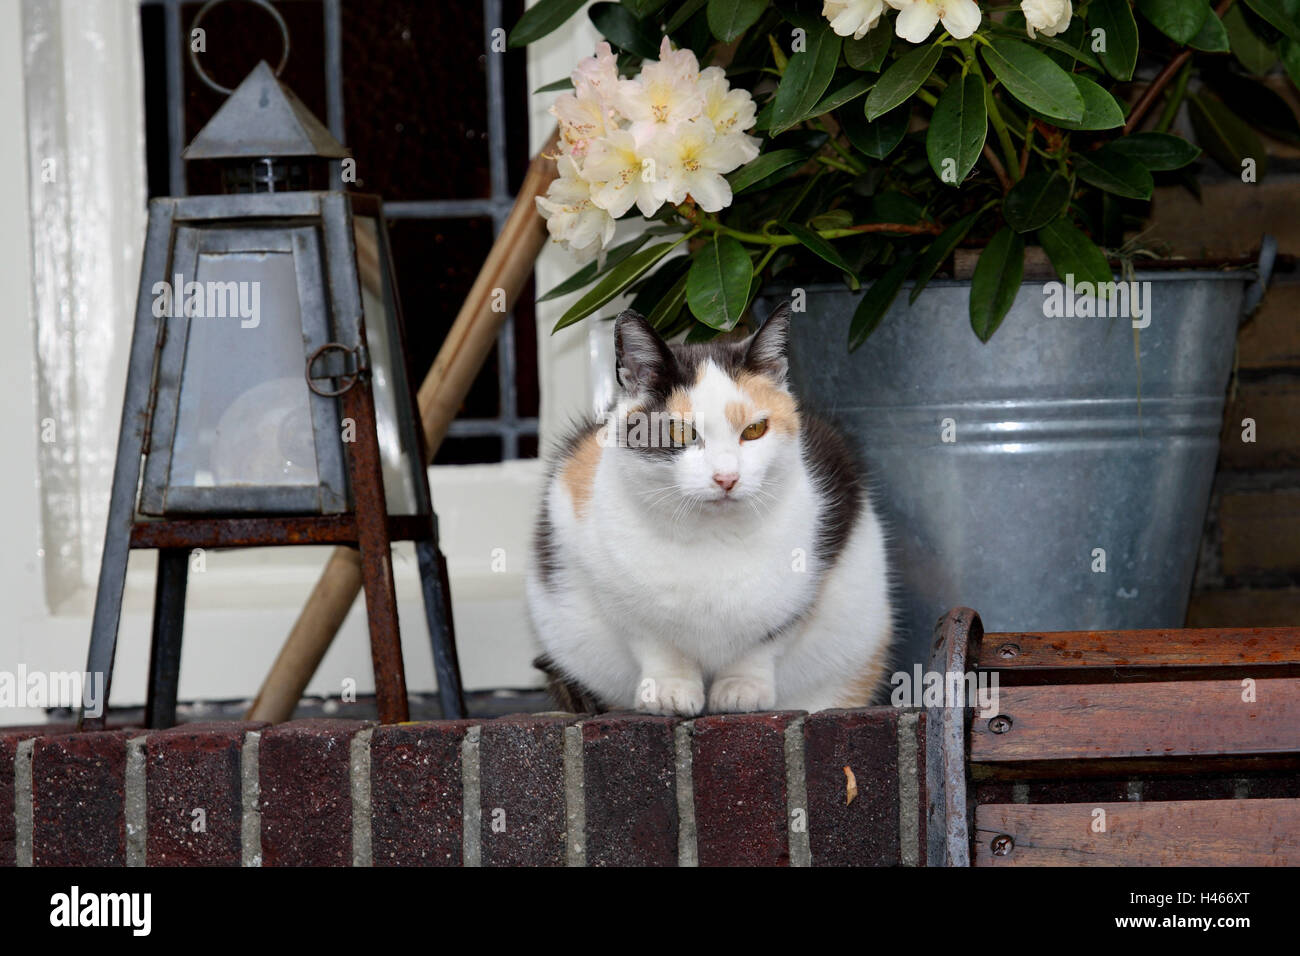 House cat, defensive wall, flower tub, Stock Photo